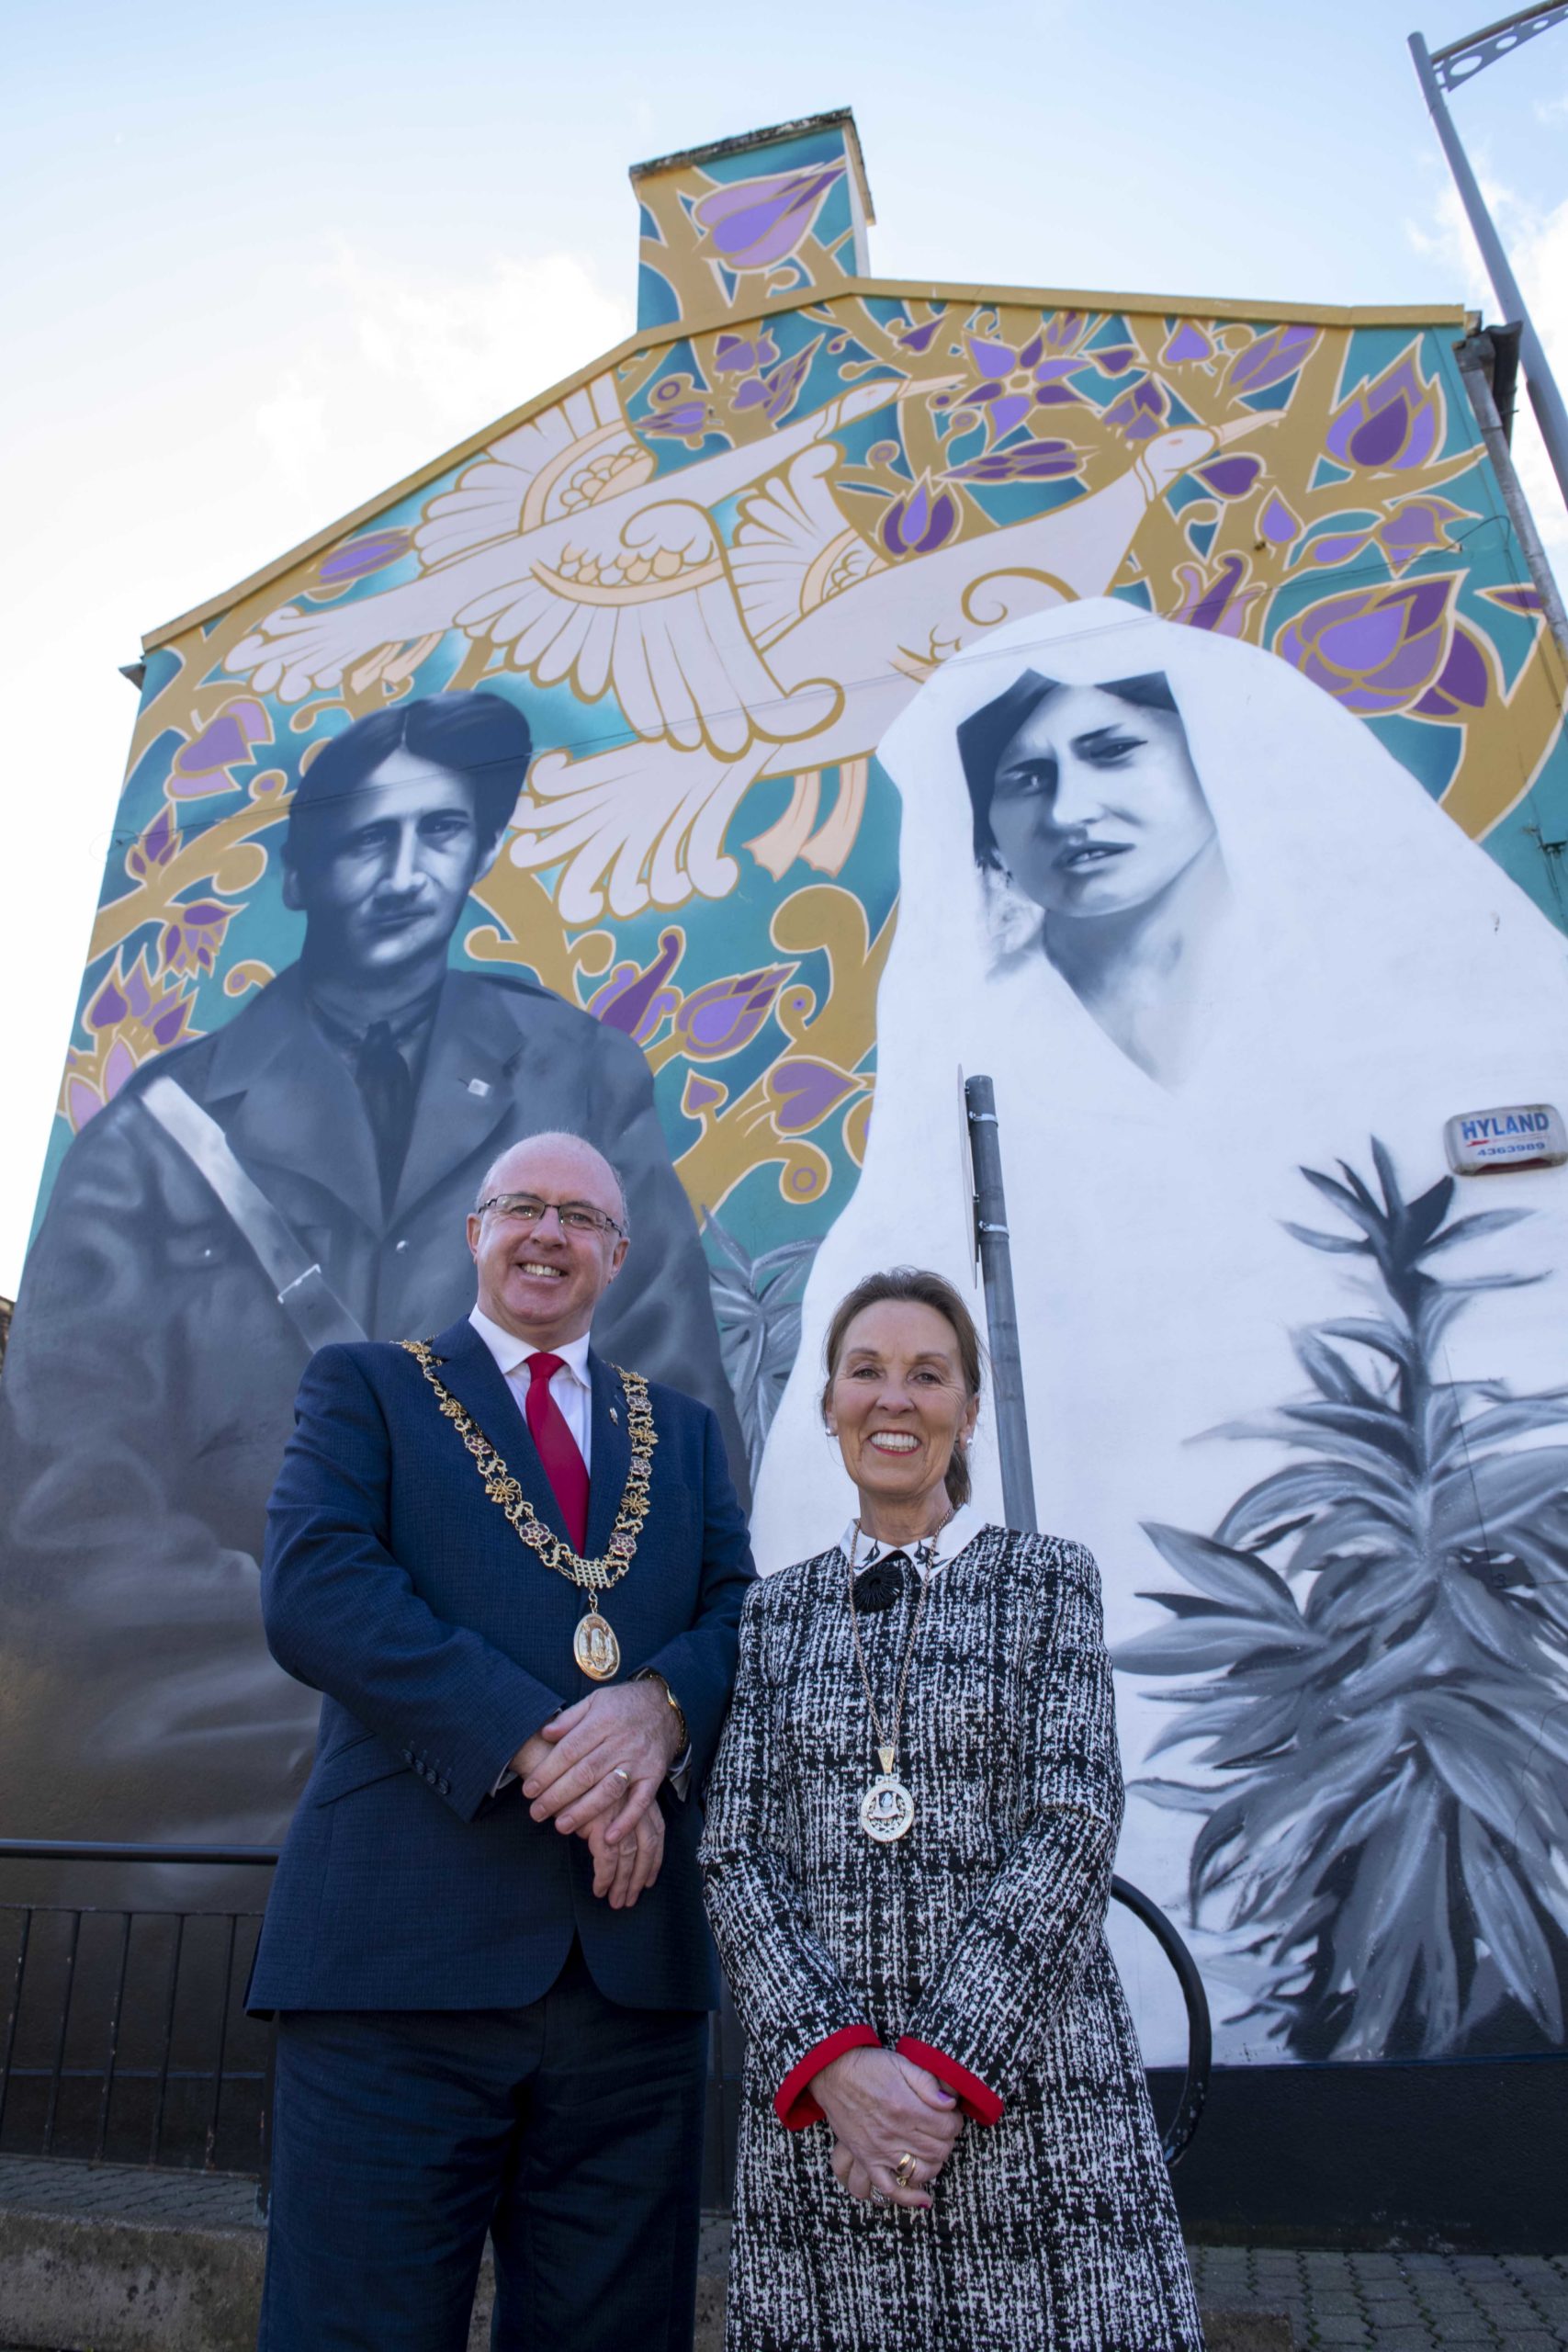 VIDEO: City Centre mural on side of building remembers Lord Mayor ...